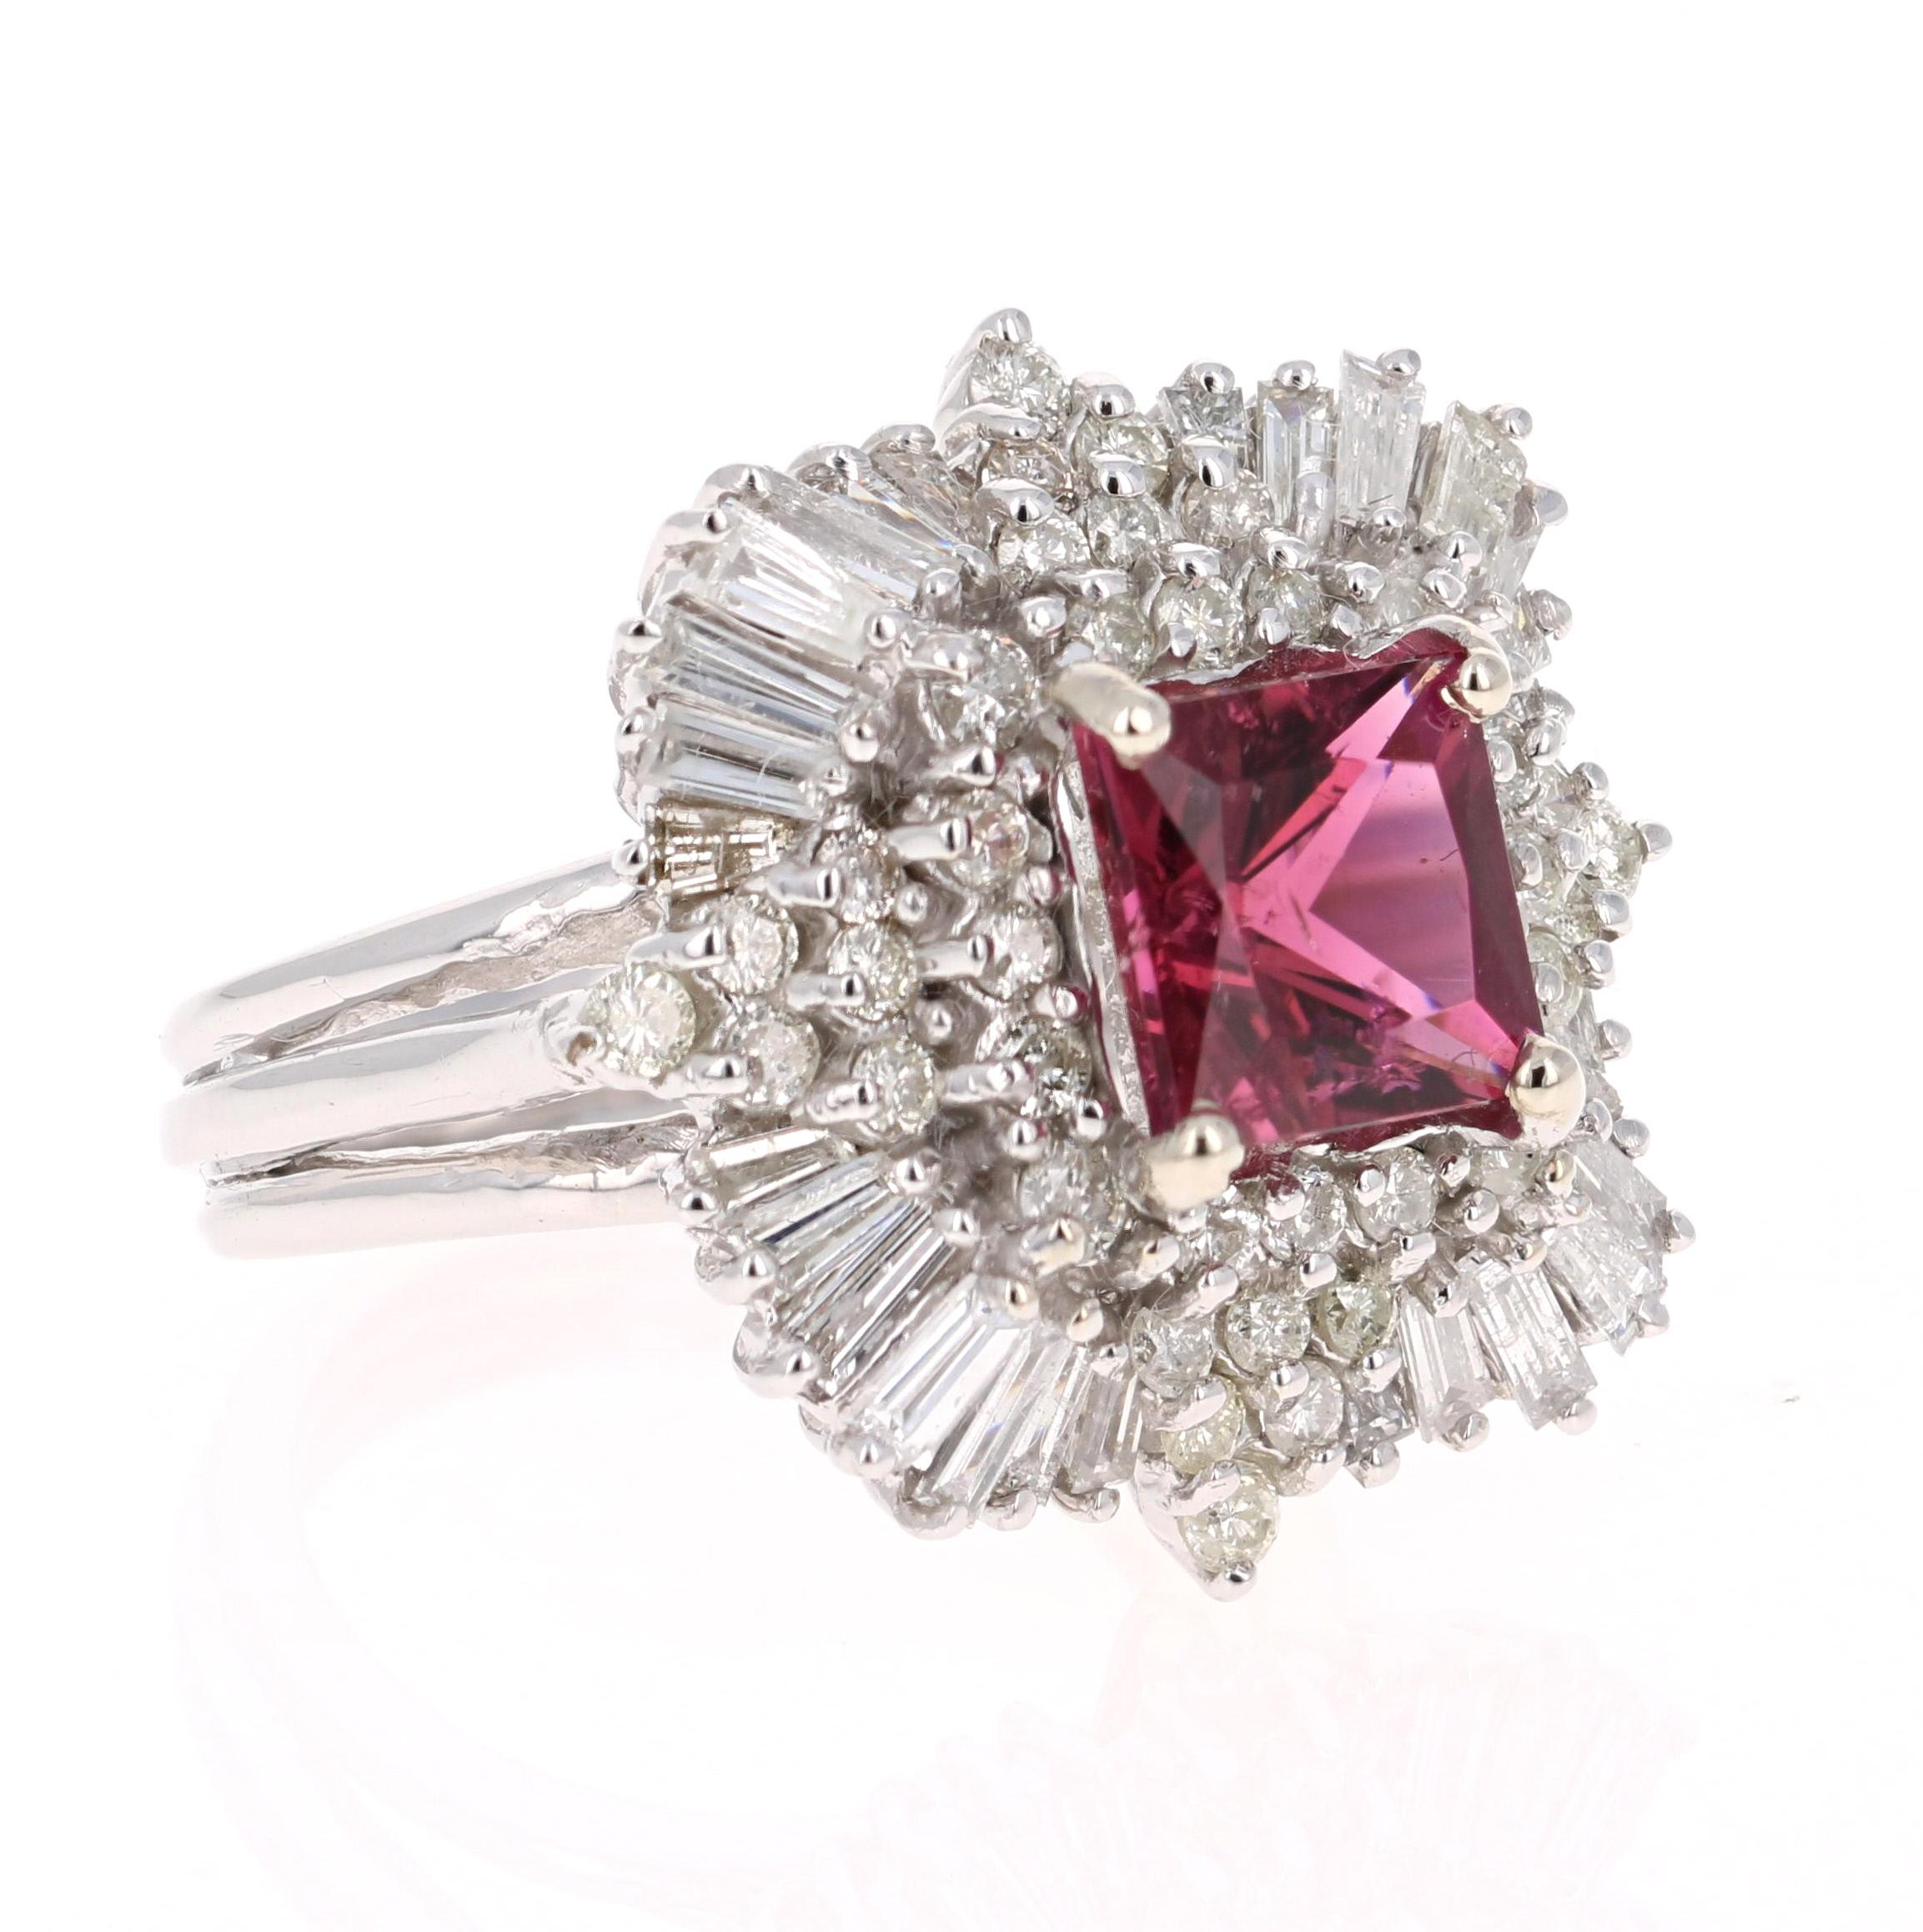 The most beautiful Ballerina ring to be designed! Truly a collectors item! 

This ring has a square cut 3.06 Carat Tourmaline and is surrounded by 28 Baguette Cut Diamonds that weigh 1.42 Carats and 40 Round Cut Diamonds that weigh 1.00 Carat. The